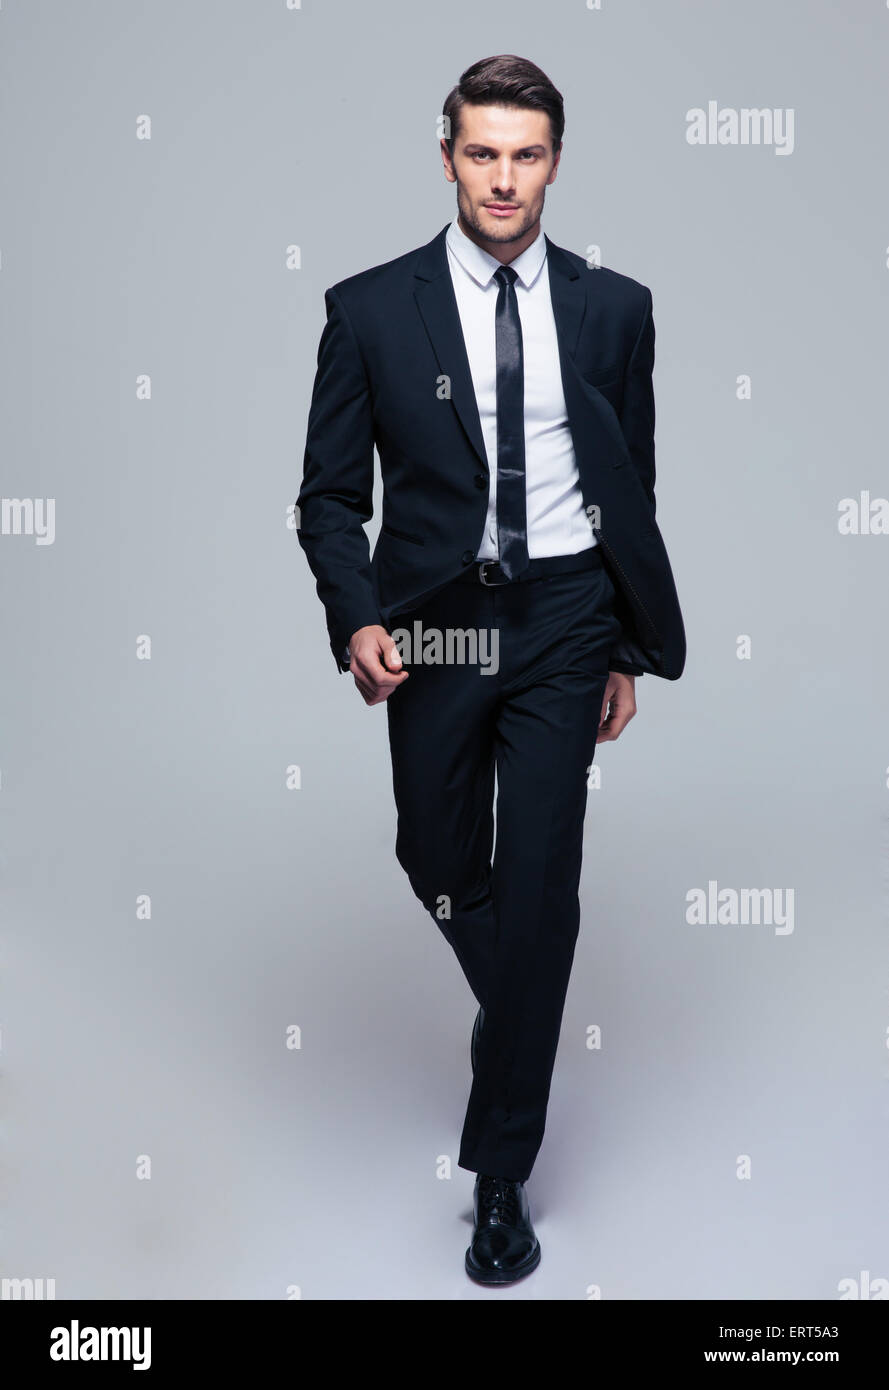 Full length portrait of a fashion male model over gray background. Looking at camera Stock Photo